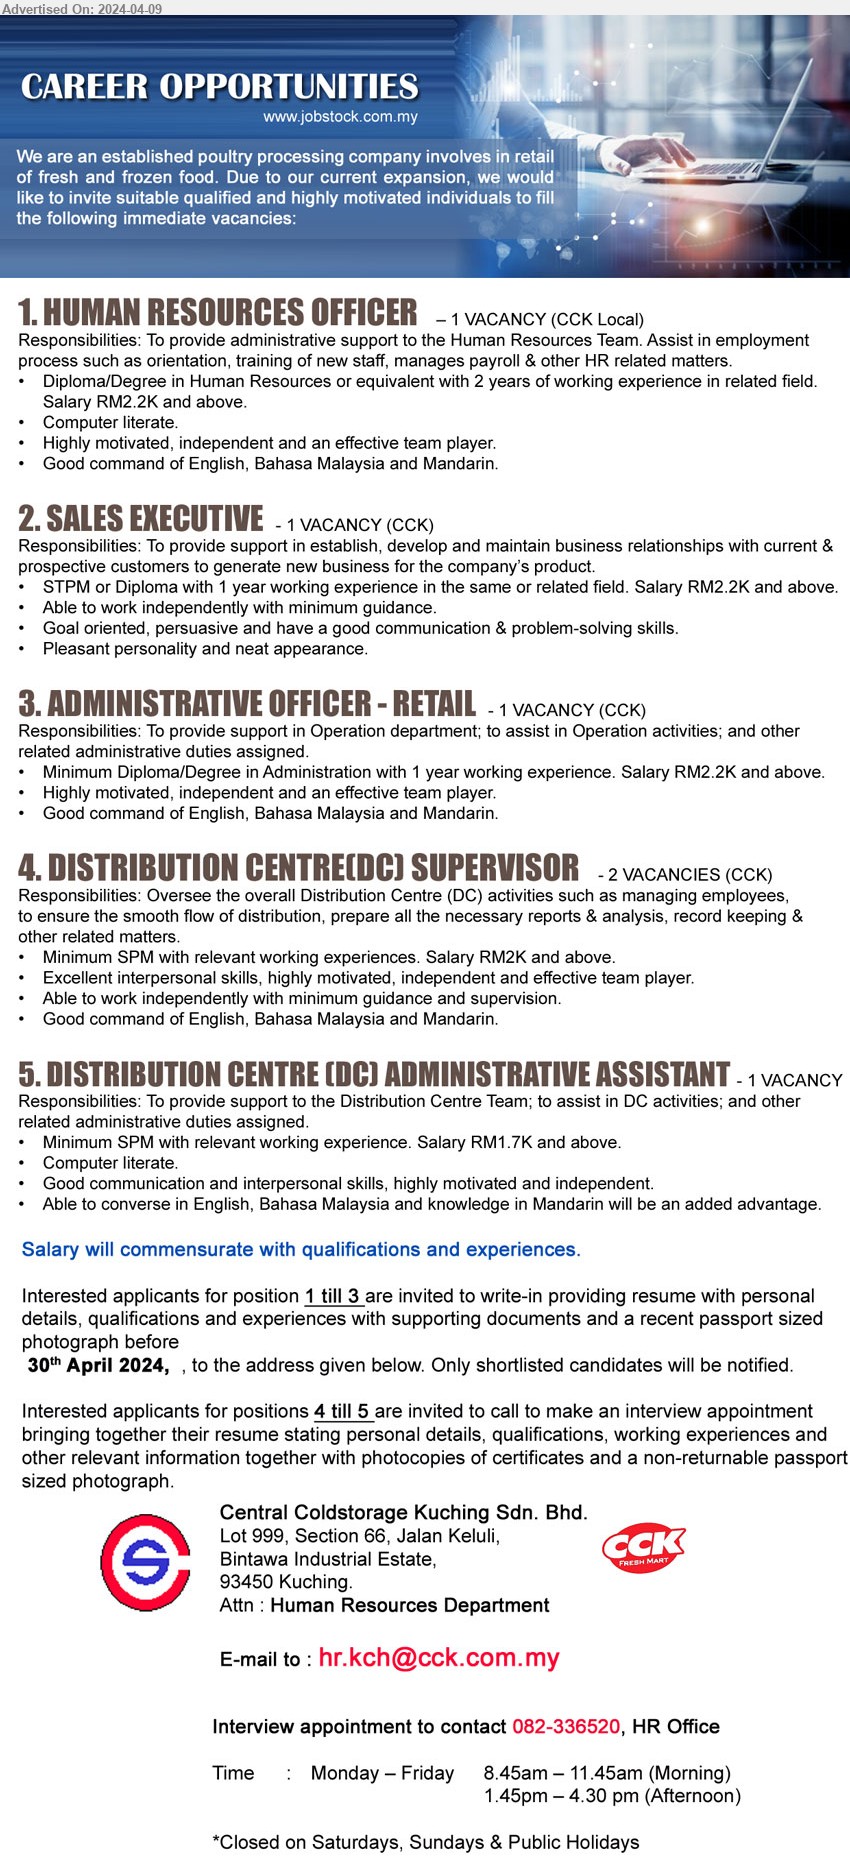 CENTRAL COLDSTORAGE KUCHING SDN BHD - 1. HUMAN RESOURCES OFFICER  (Kuching), Diploma/Degree in Human Resources or equivalent with 2 years of working experience in related field. Salary RM2.2K and above,...
2. SALES EXECUTIVE  (Kuching), STPM or Diploma with 1 year working experience in the same or related field. Salary RM2.2K,...
3. ADMINISTRATIVE OFFICER - RETAIL  (Kuching), Diploma/Degree in Administration with 1 year working experience. Salary RM2.2K ,...
4. DISTRIBUTION CENTRE(DC) SUPERVISOR  (Kuching), Minimum SPM with relevant working experiences. Salary RM2K and above,...
5. DISTRIBUTION CENTRE (DC) ADMINISTRATIVE ASSISTANT  (Kuching), Minimum SPM with relevant working experience. Salary RM1.7K and above,...
Contact 082-336520 for interview arrangement / Email resume to ...
